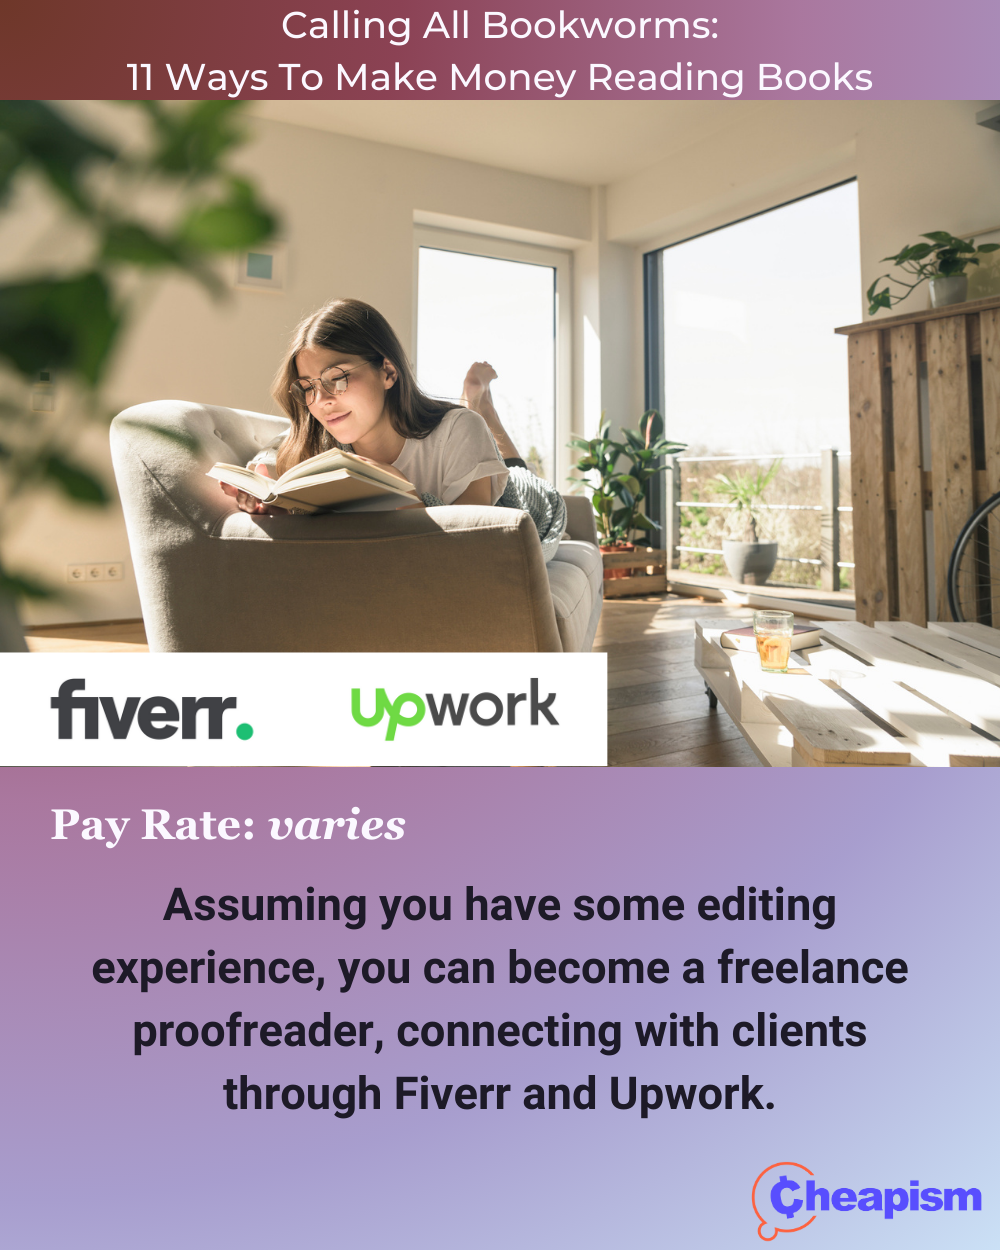 Fiverr and Upwork